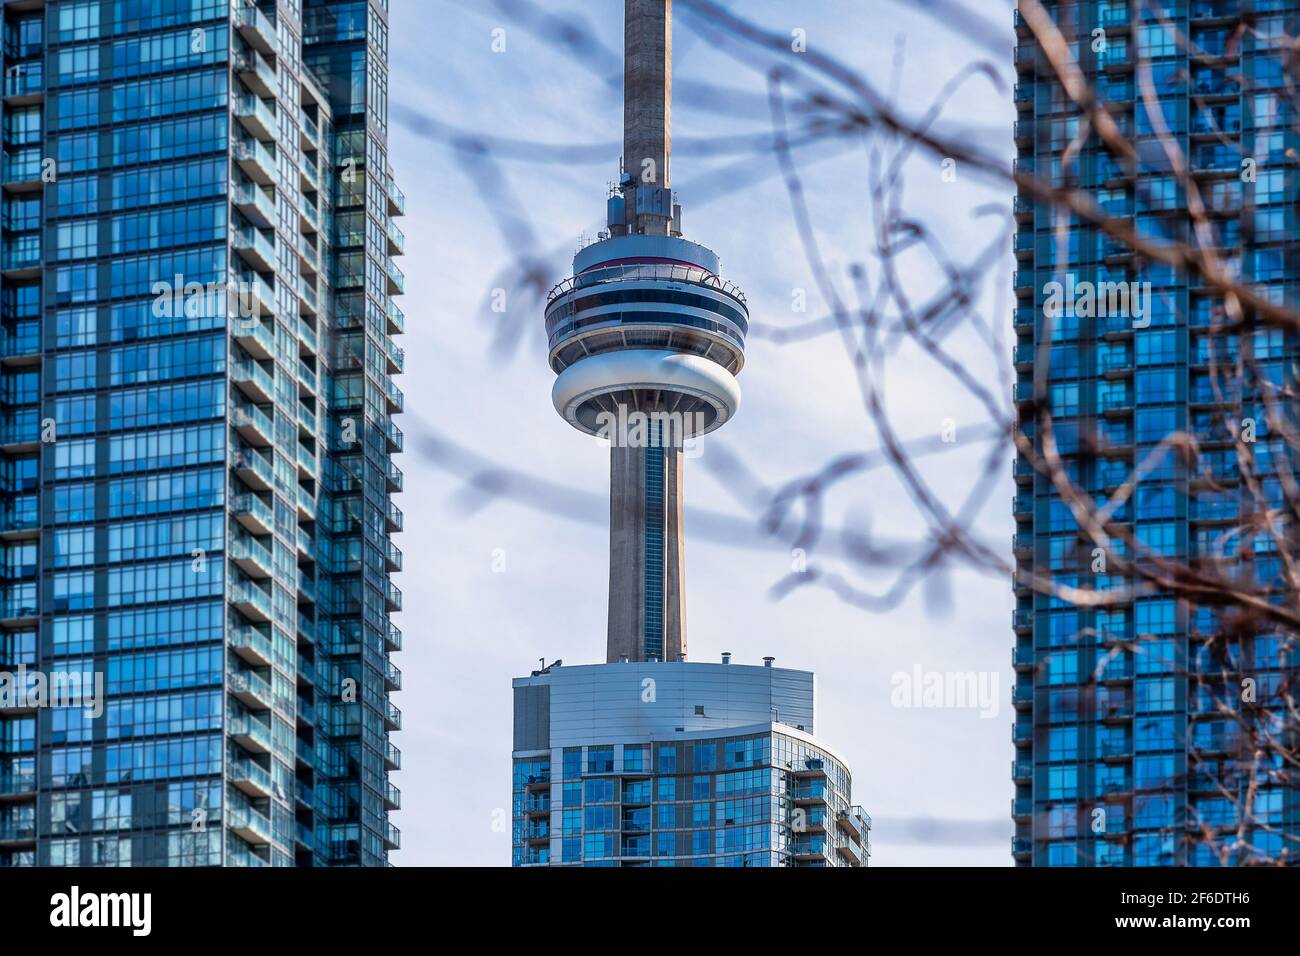 The CN Tower, a Canadian symbol and International Landmark, is seen from an unusual point of view Stock Photo